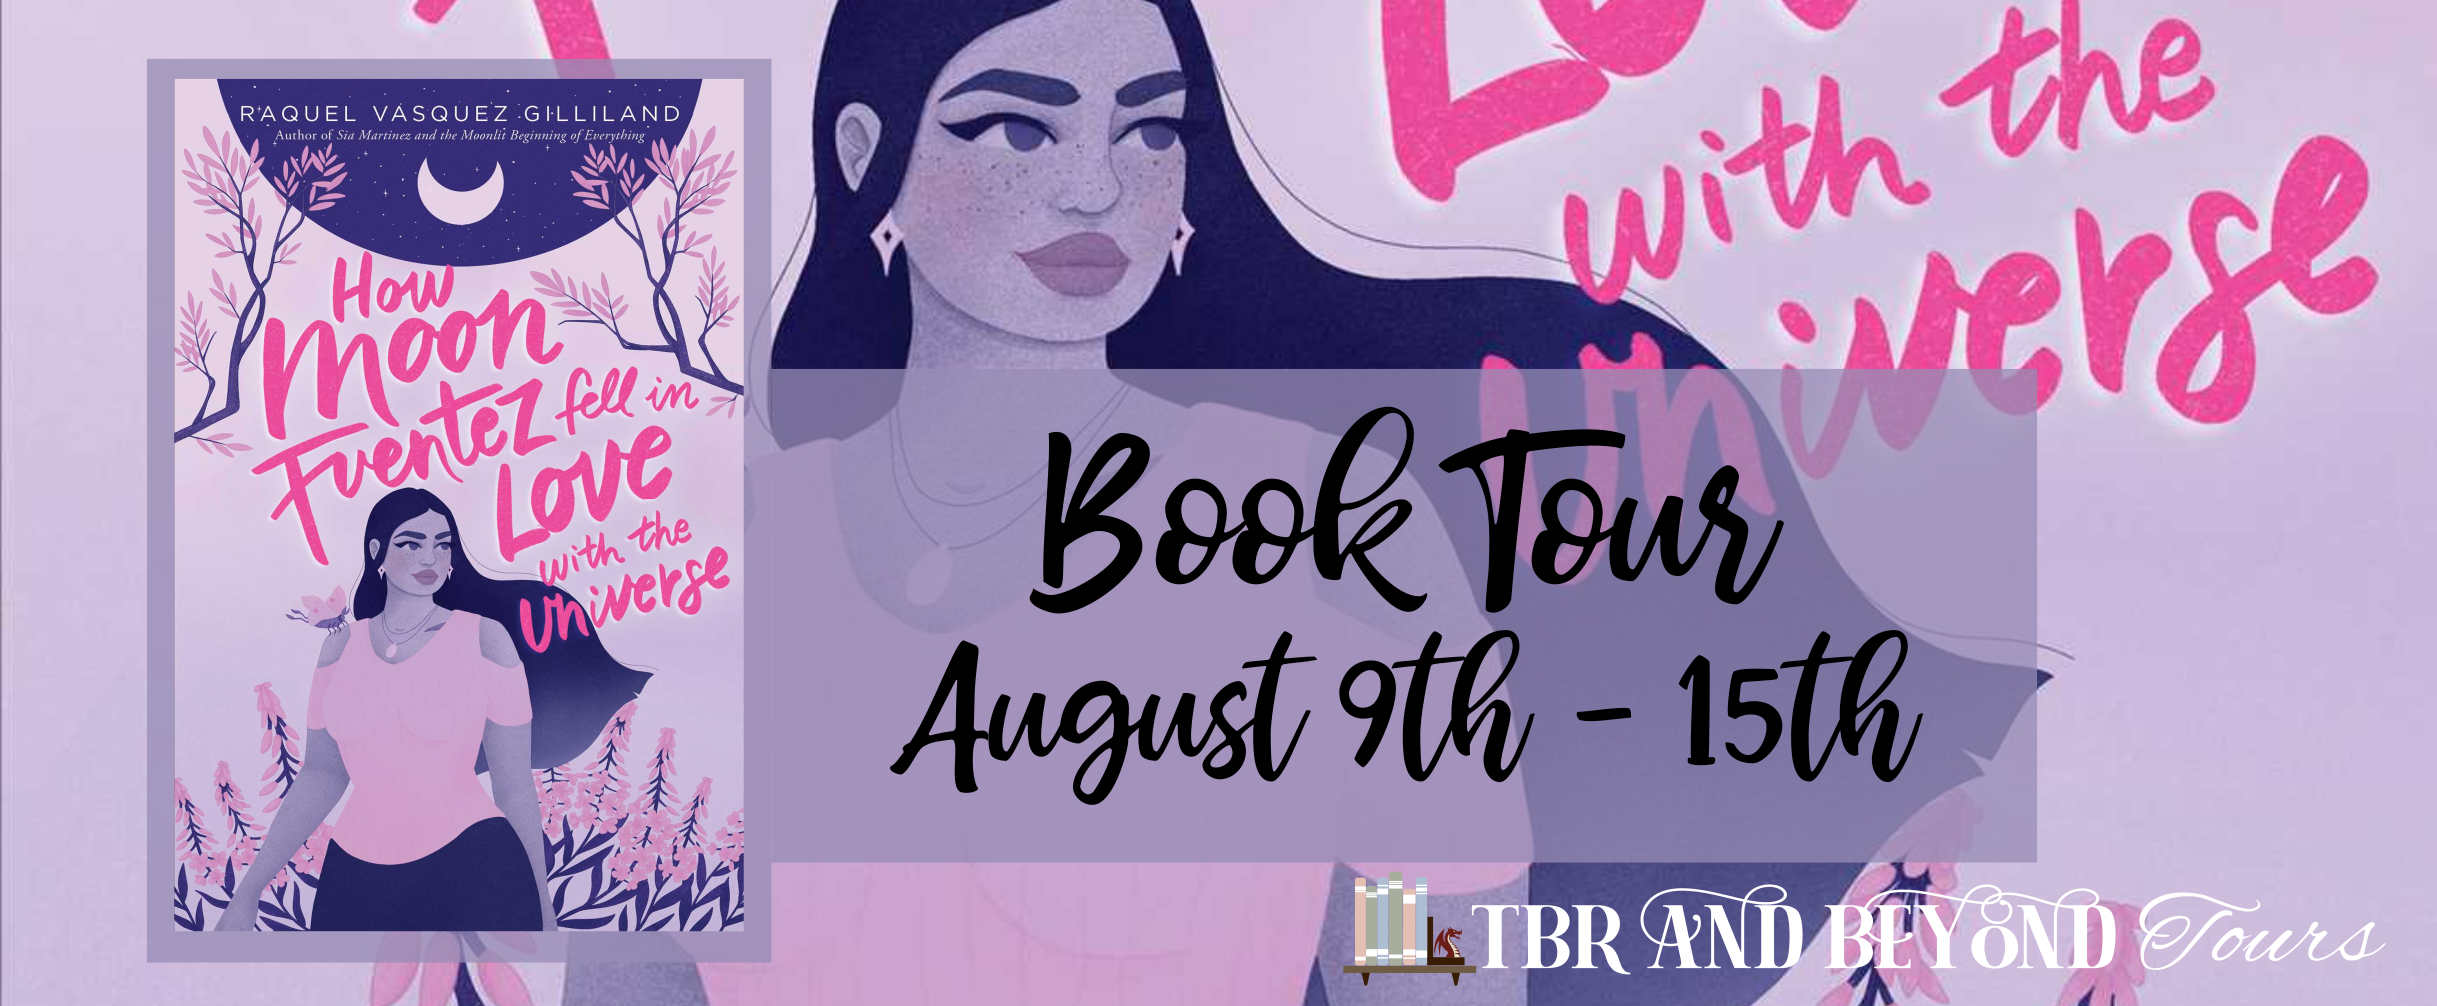 Blog Tour: How Moon Fuentez Fell in Love with the Universe by Raquel Vasquez Gilliand (Reading Journal + Top 5 Reasons to Read + Bookstagram!)